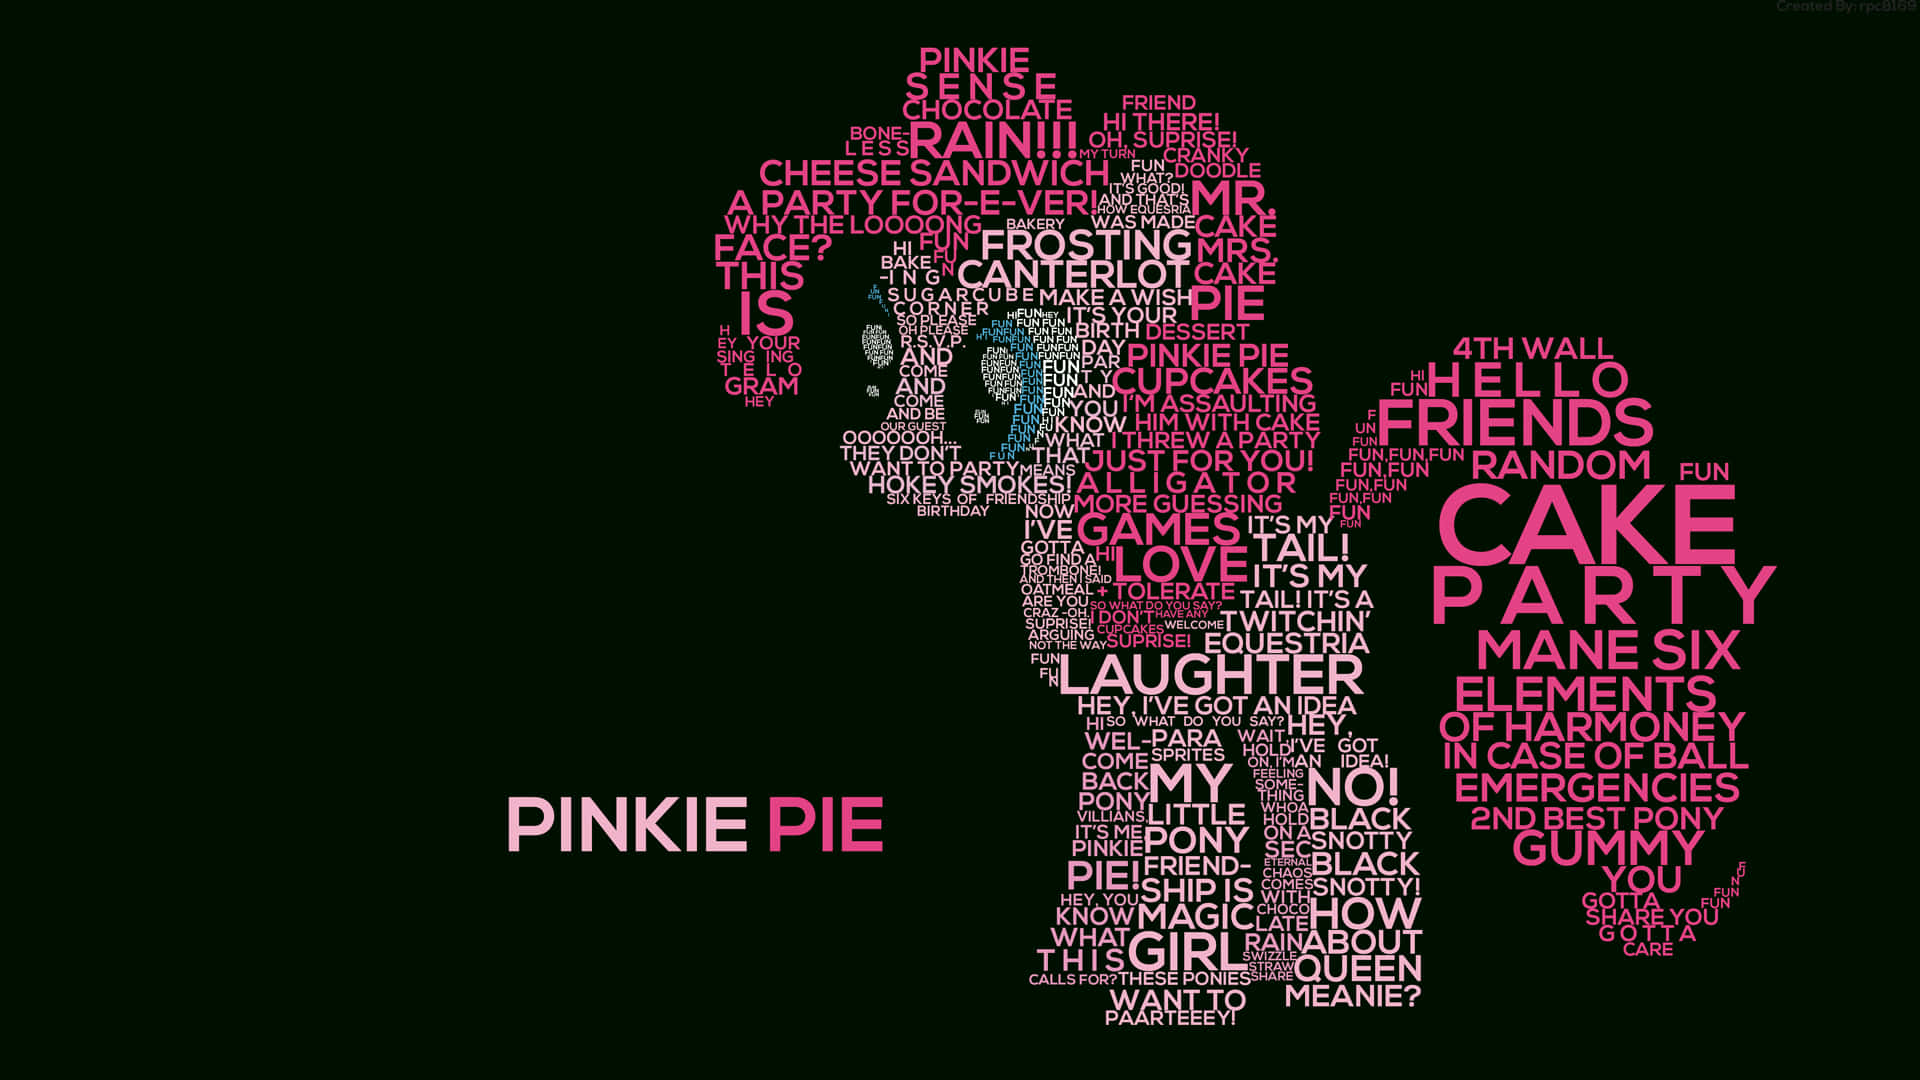 Bursting with Fun and Laughter - Pinkie Pie